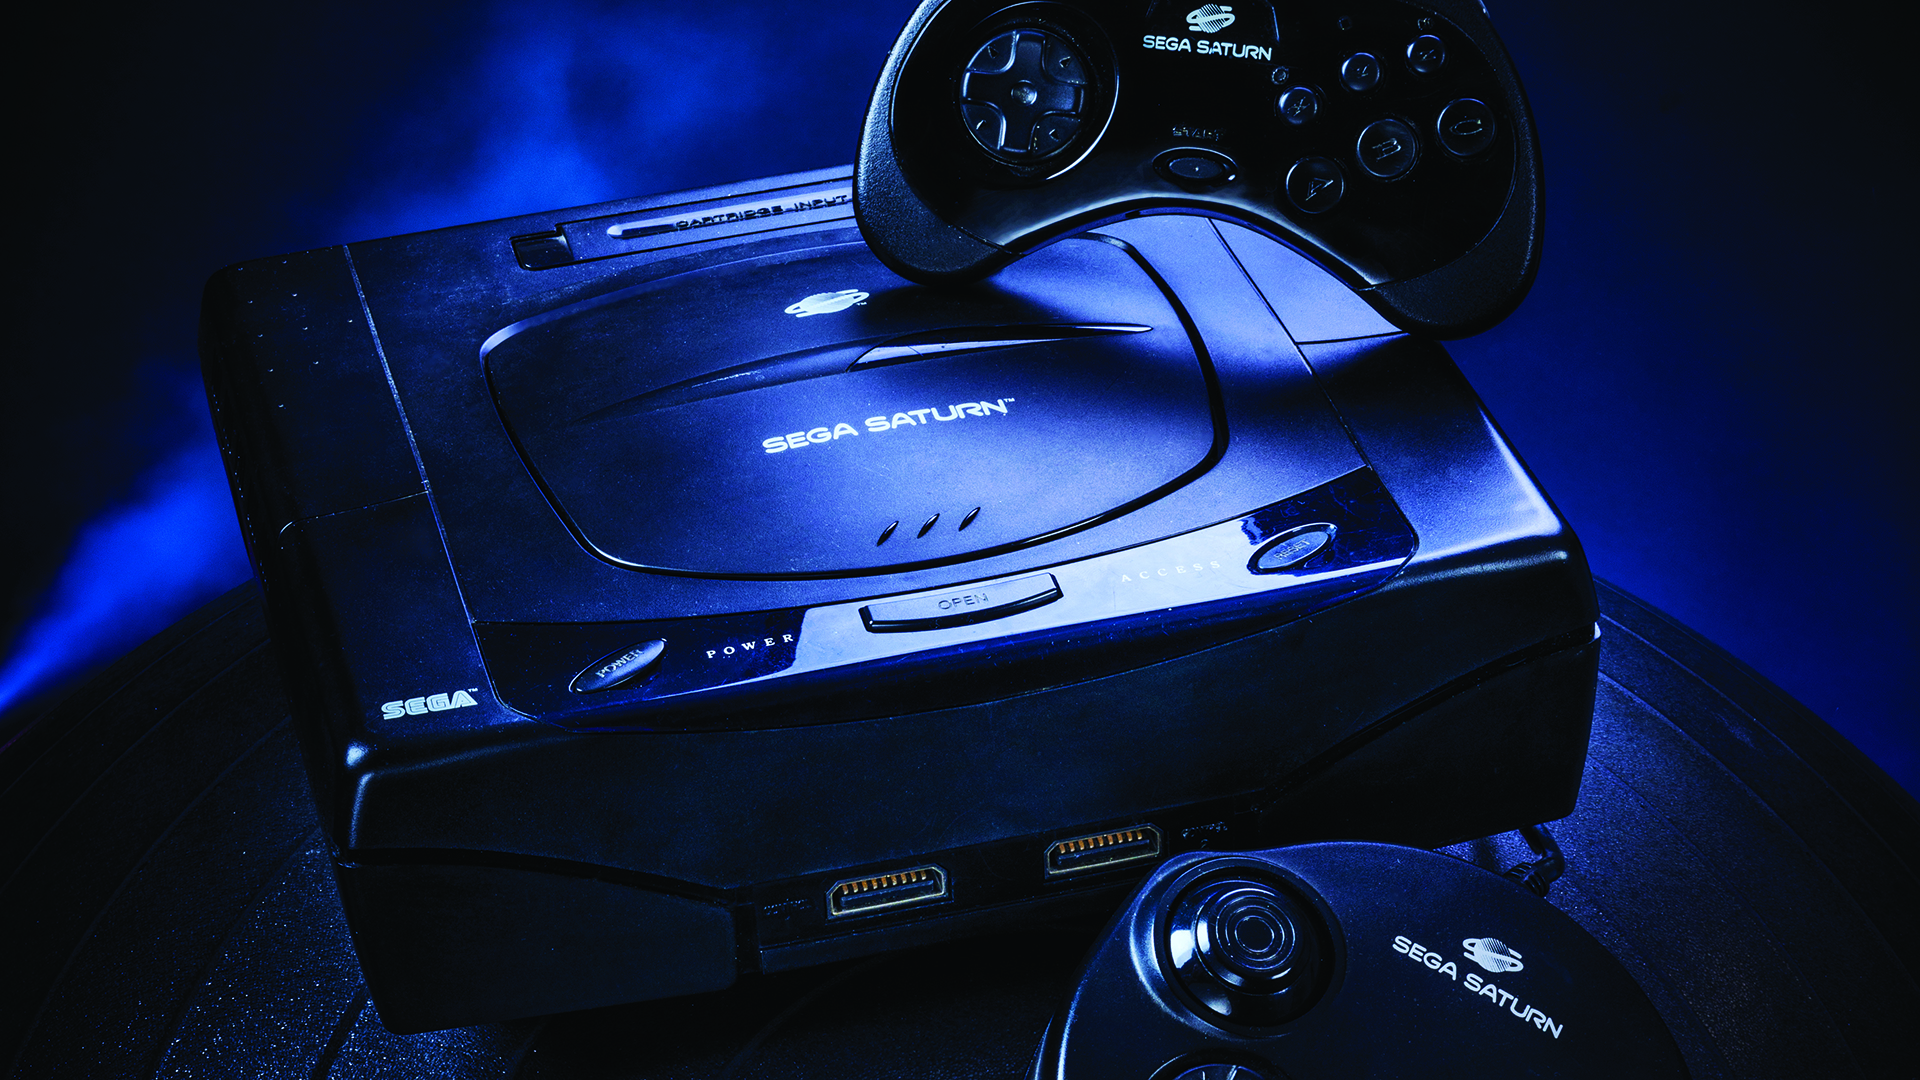 Best Saturn games of all time from Die Hard Arcade to Panzer Dragoon Saga